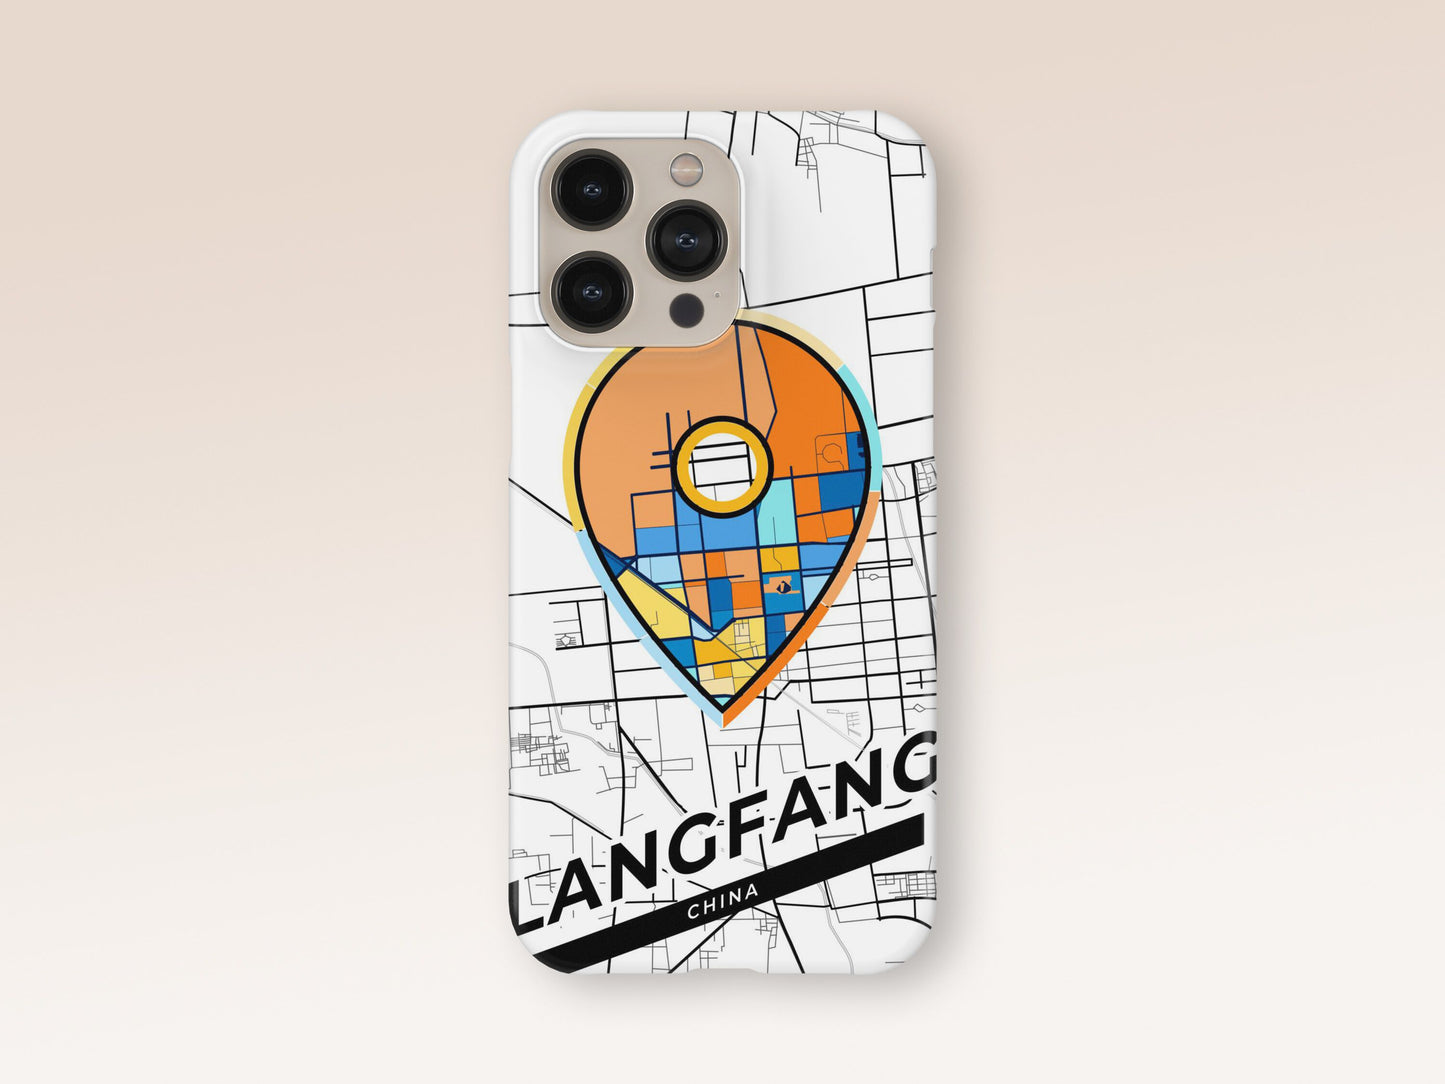 Langfang China slim phone case with colorful icon. Birthday, wedding or housewarming gift. Couple match cases. 1